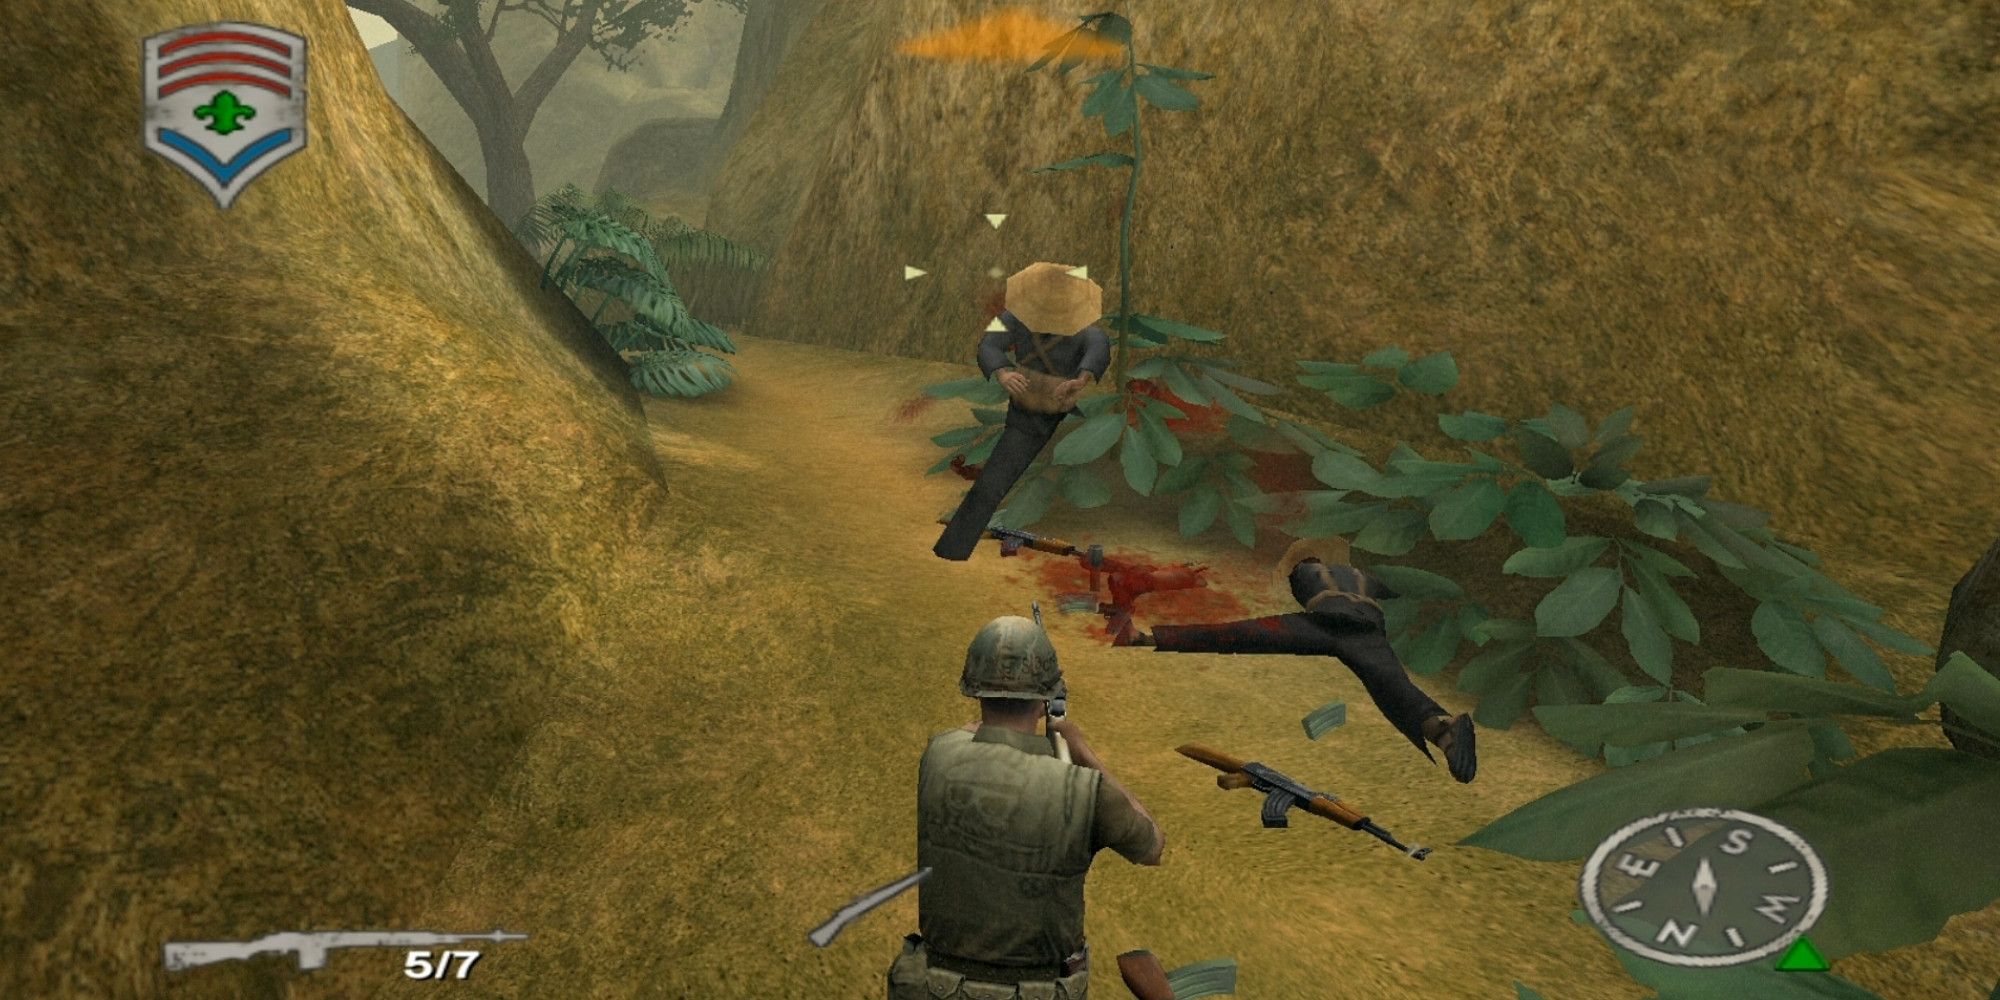 player defeats enemies with weapons